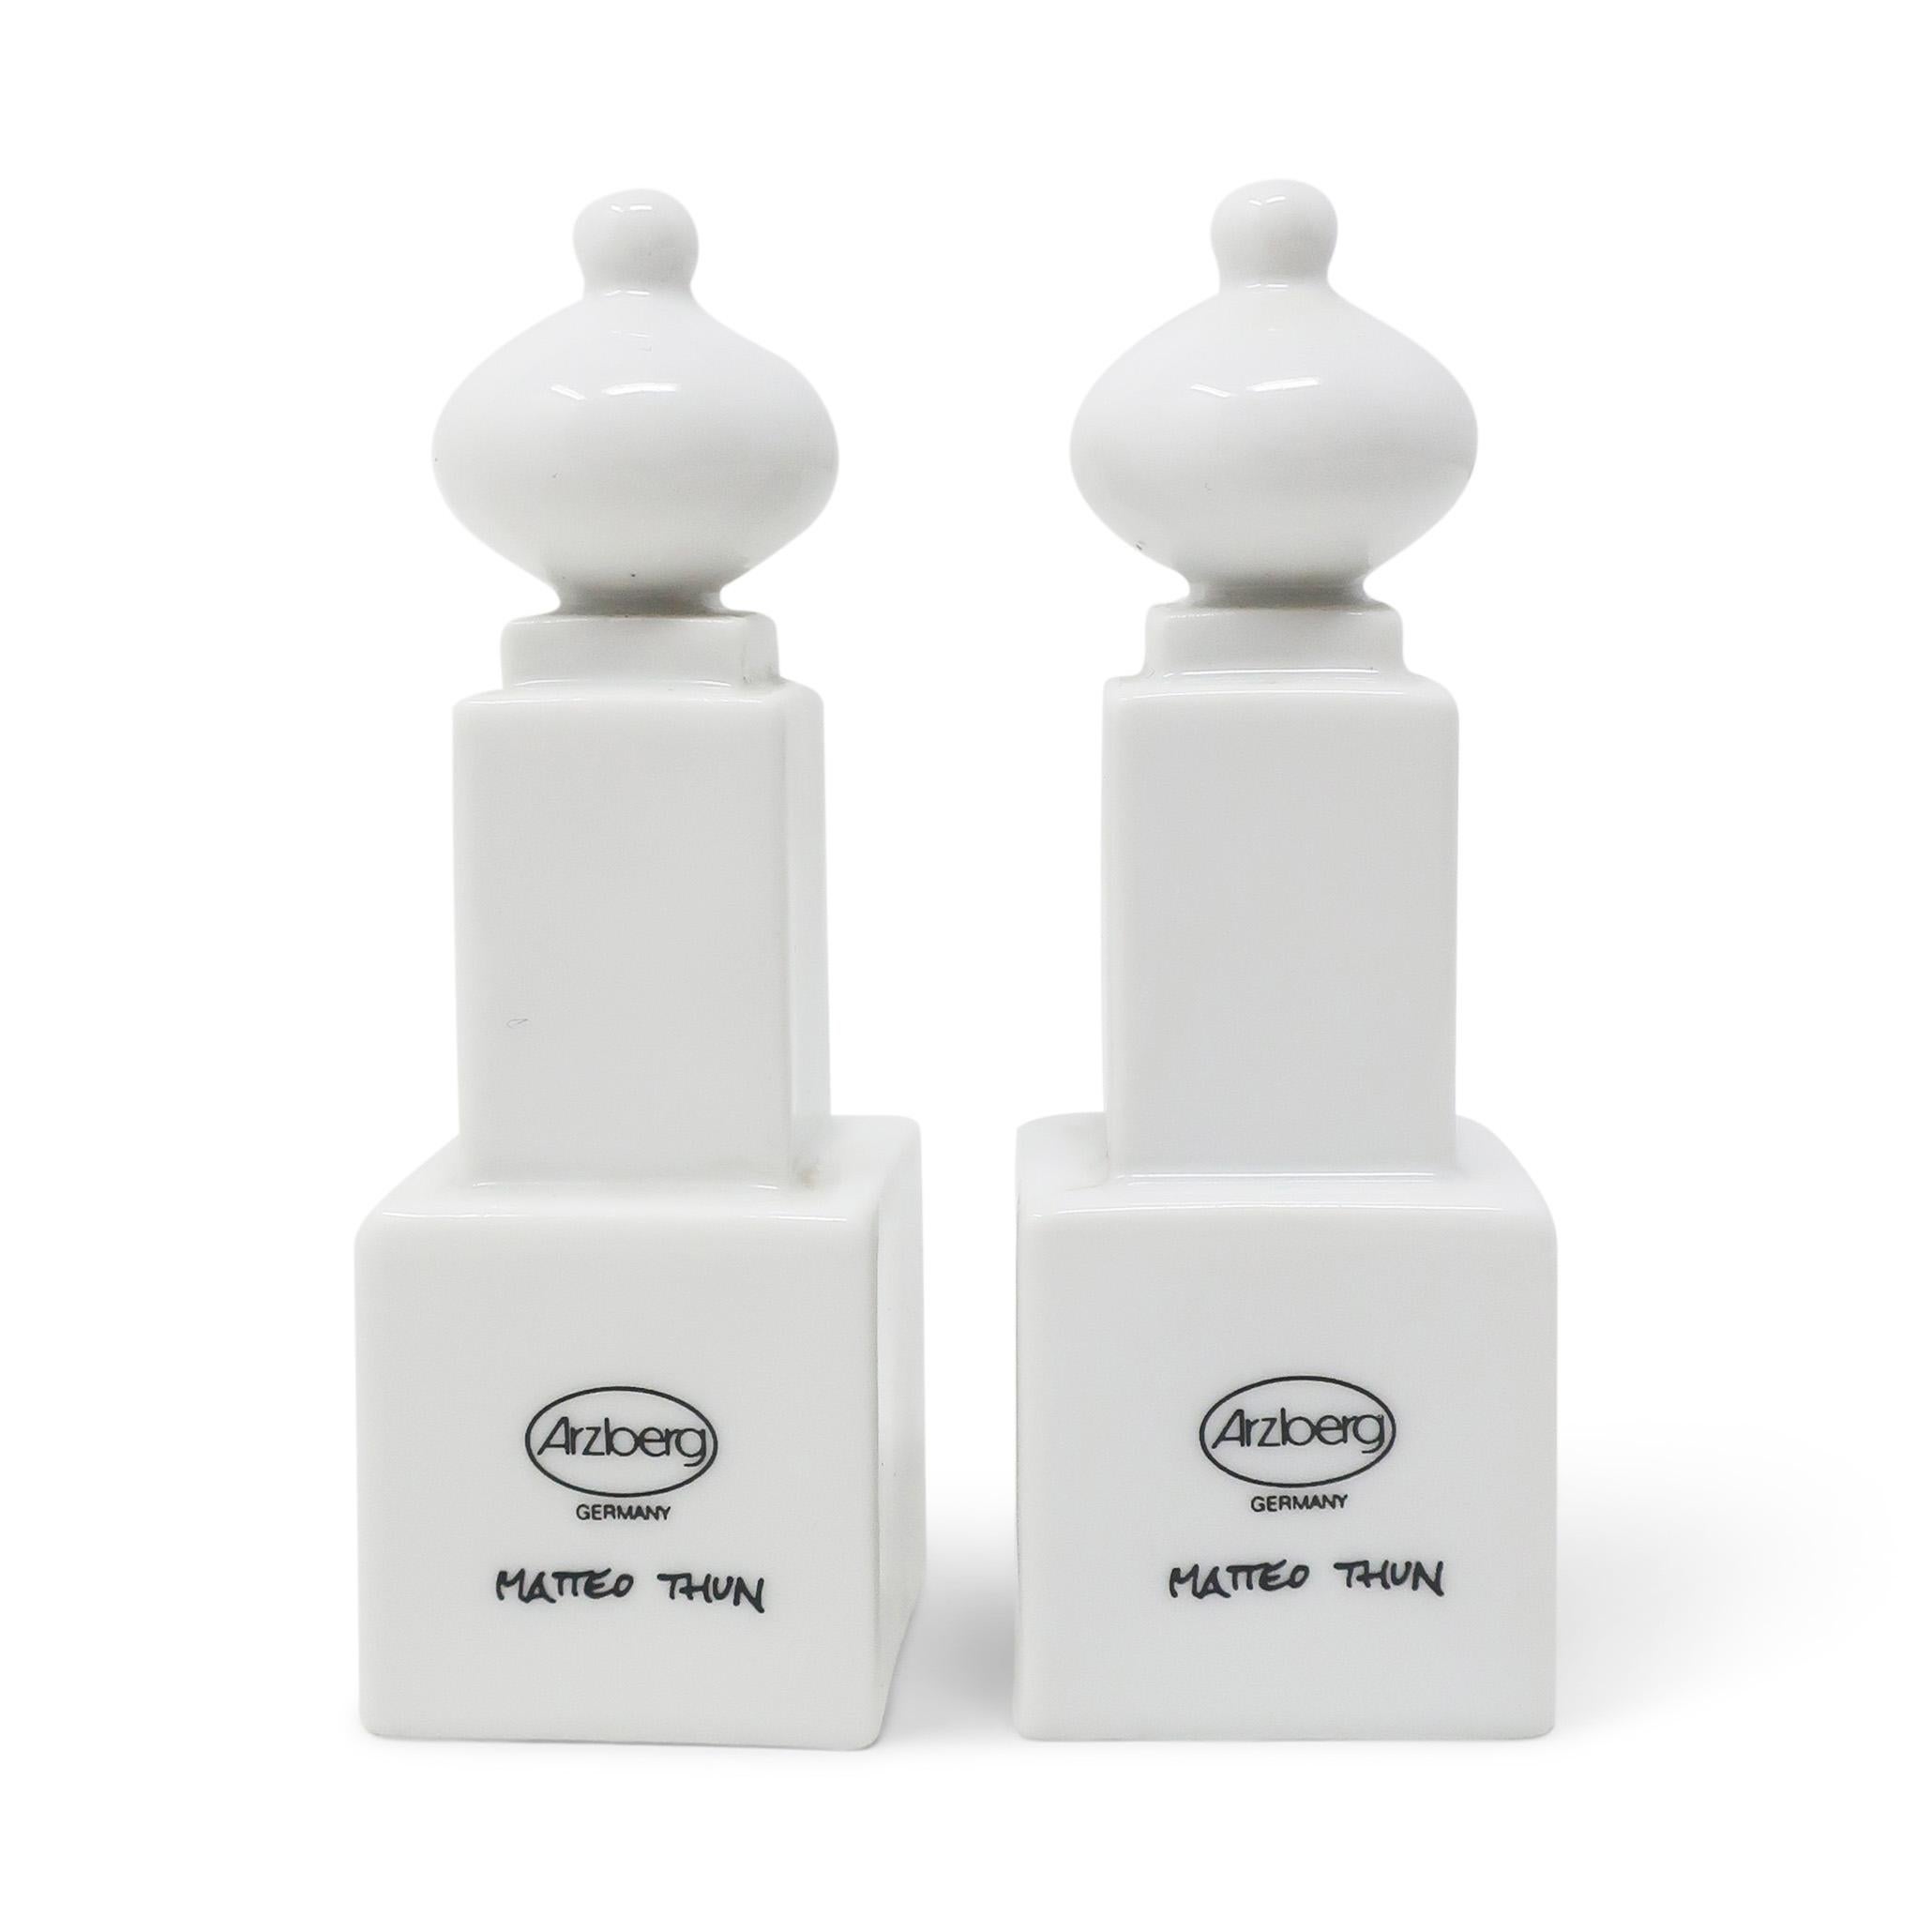 Porcelain Monumenti Salt & Pepper Shakers by Matteo Thun for Arzberg, 1987 In Good Condition For Sale In Brooklyn, NY